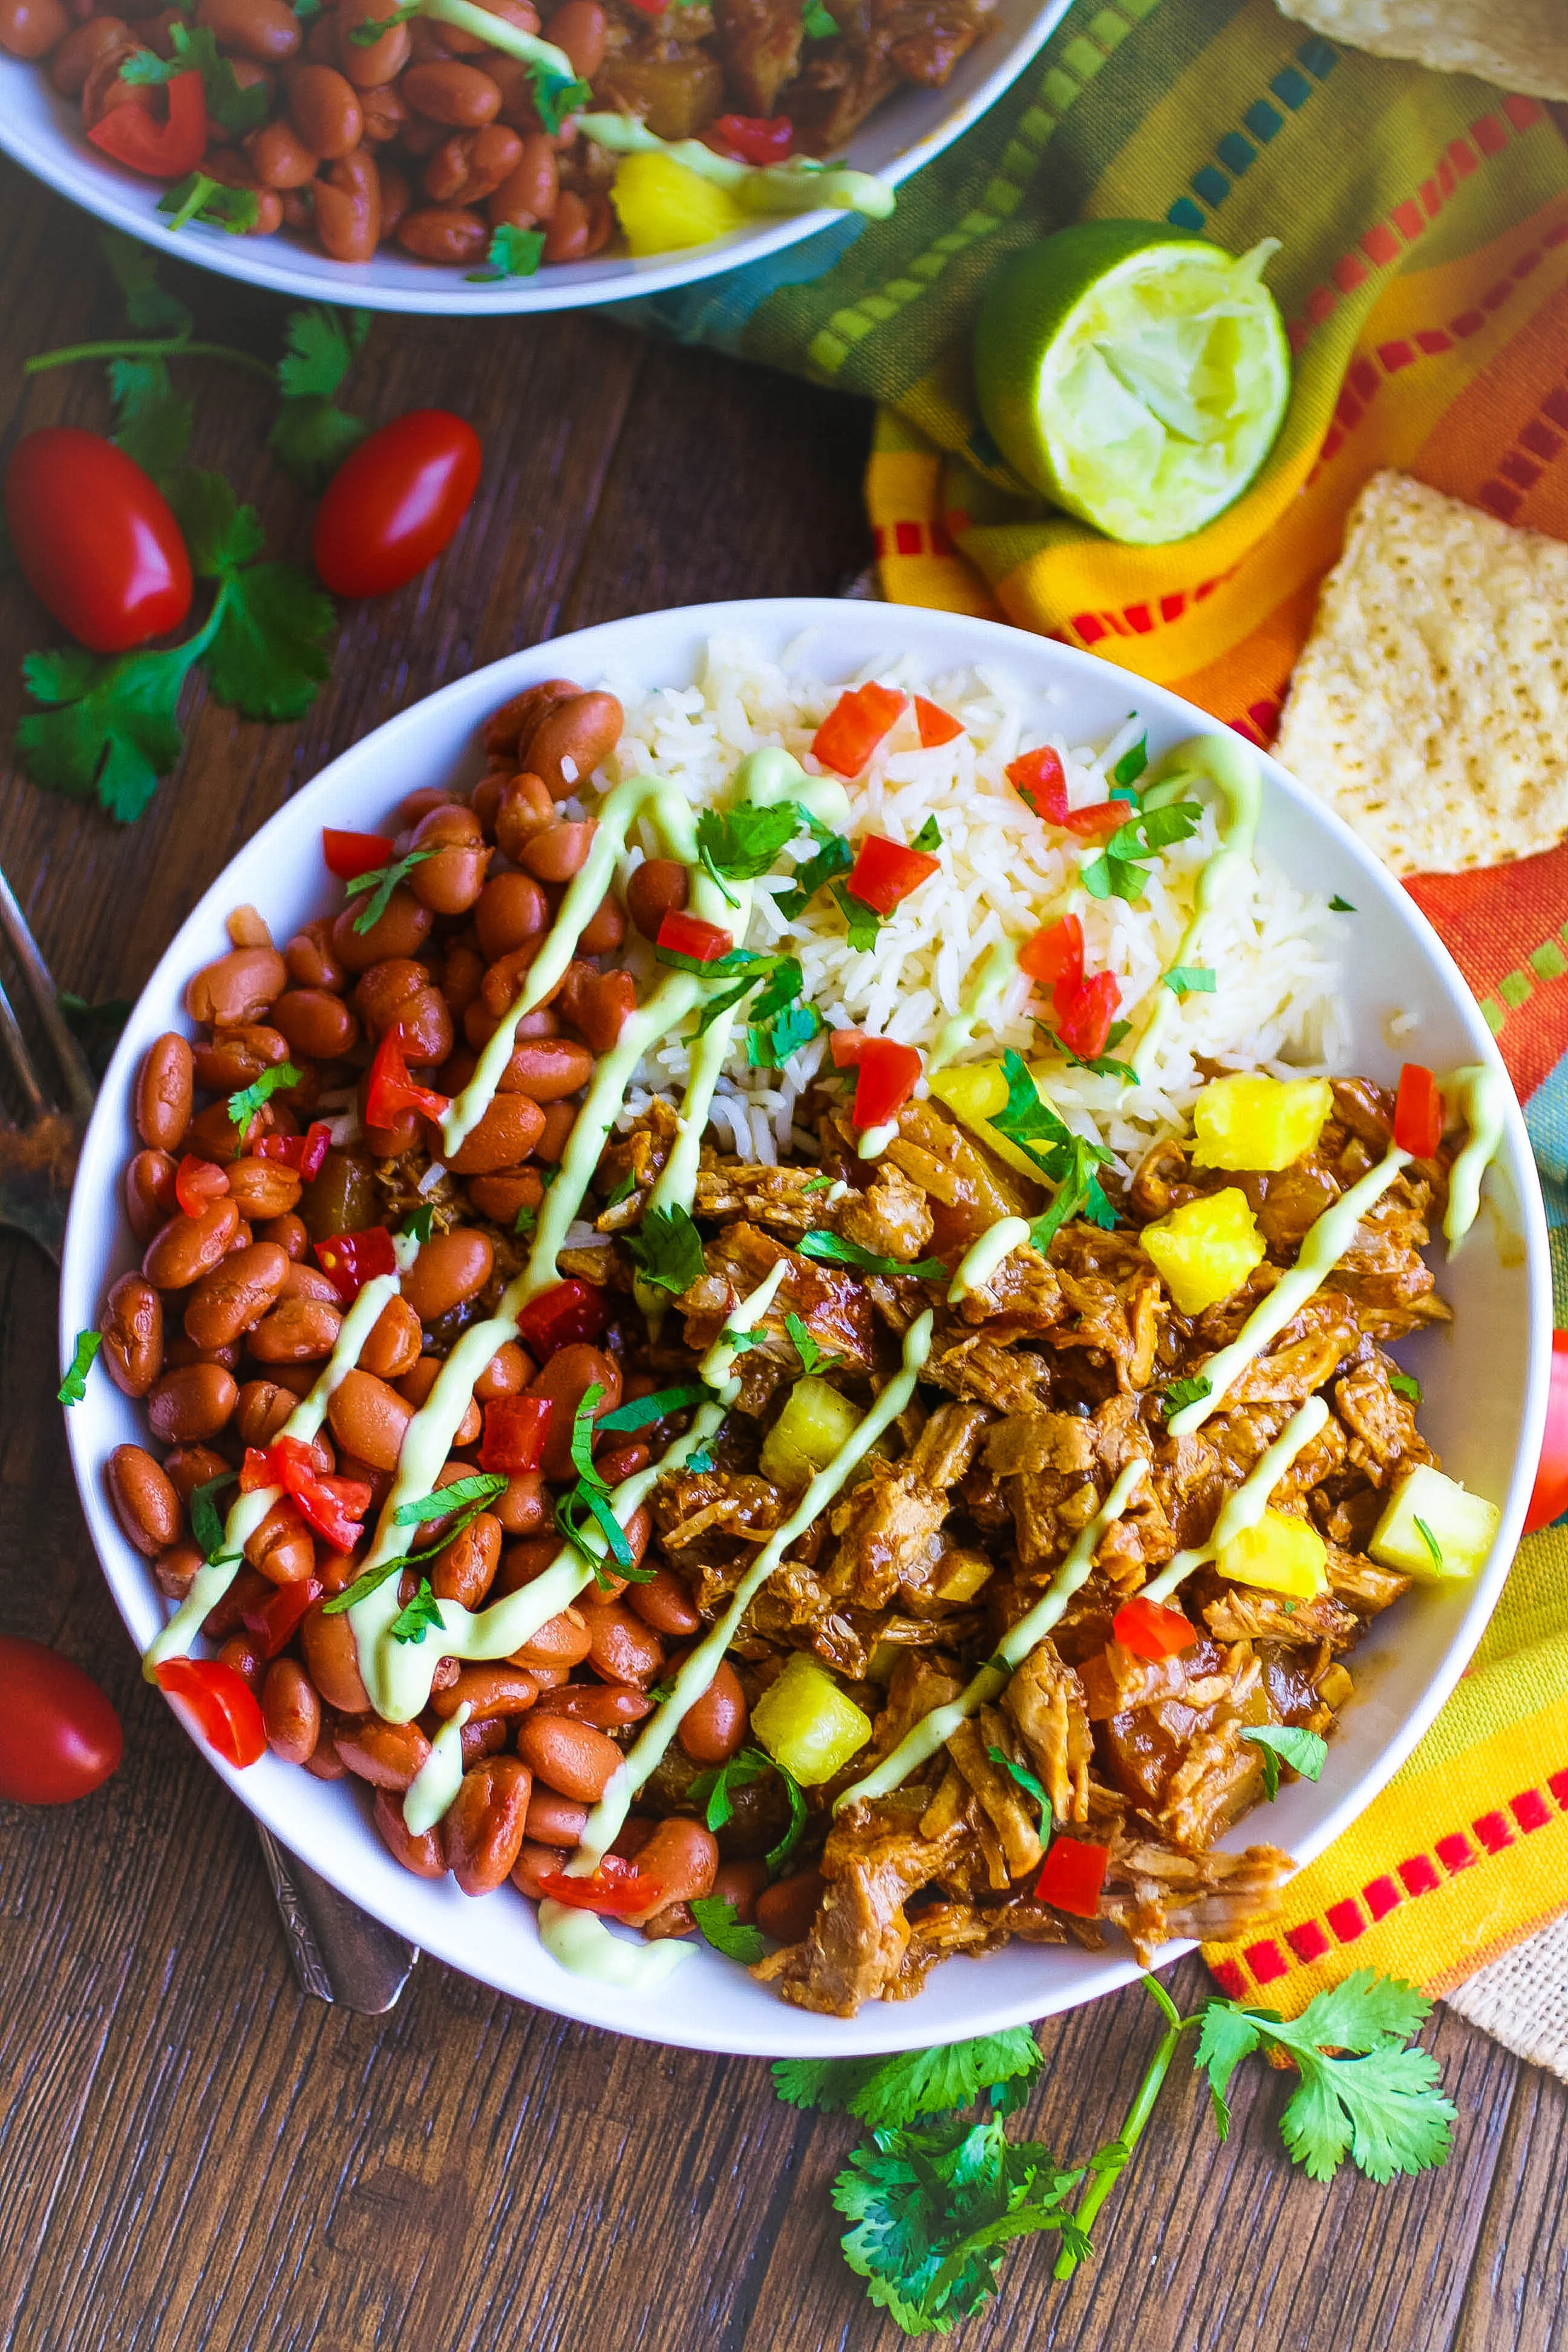 Pork al Pastor Bowls are such a treat for any meal. You'll enjoy the flavor of these Pork al Pastor Bowls!